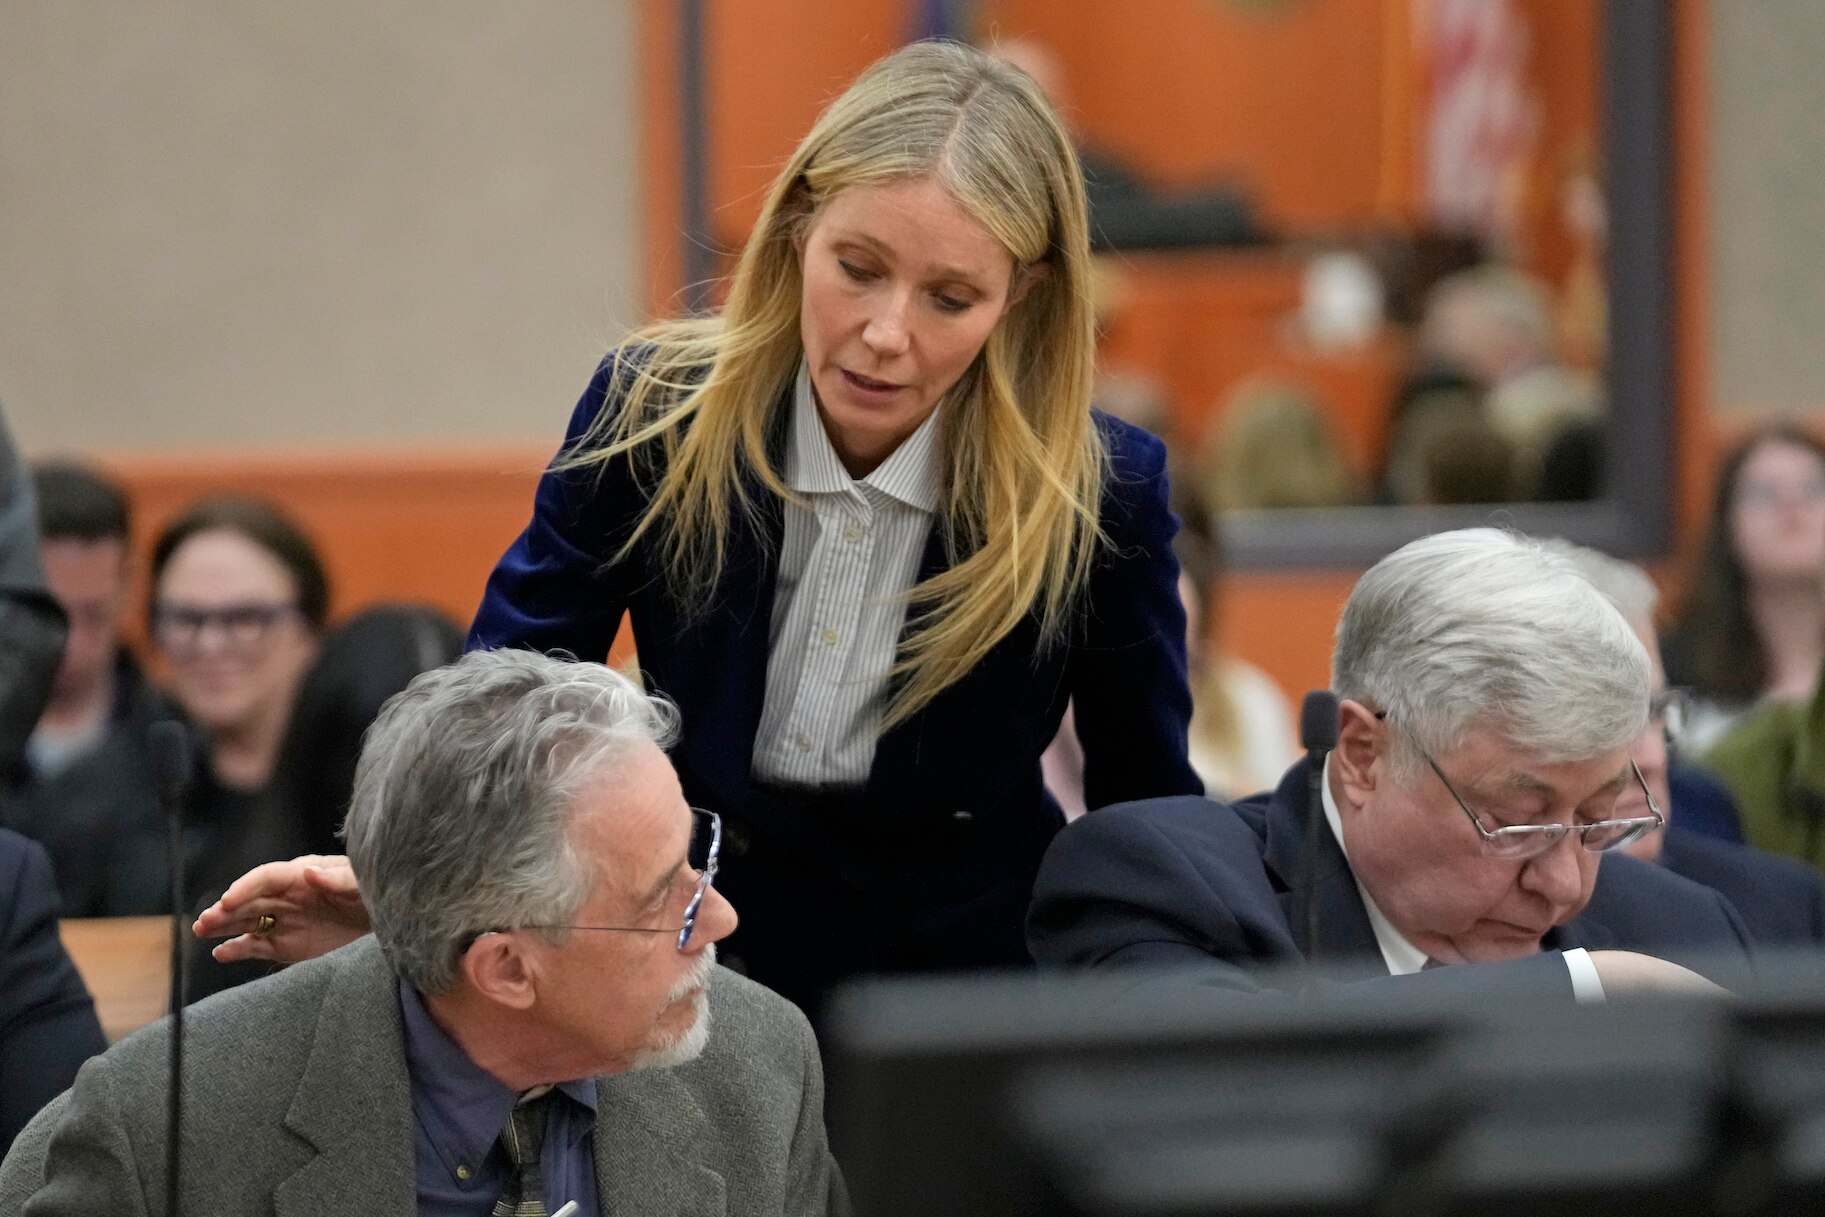 Gwyneth Paltrow taps Terry Sanderson on the shoulder in court.